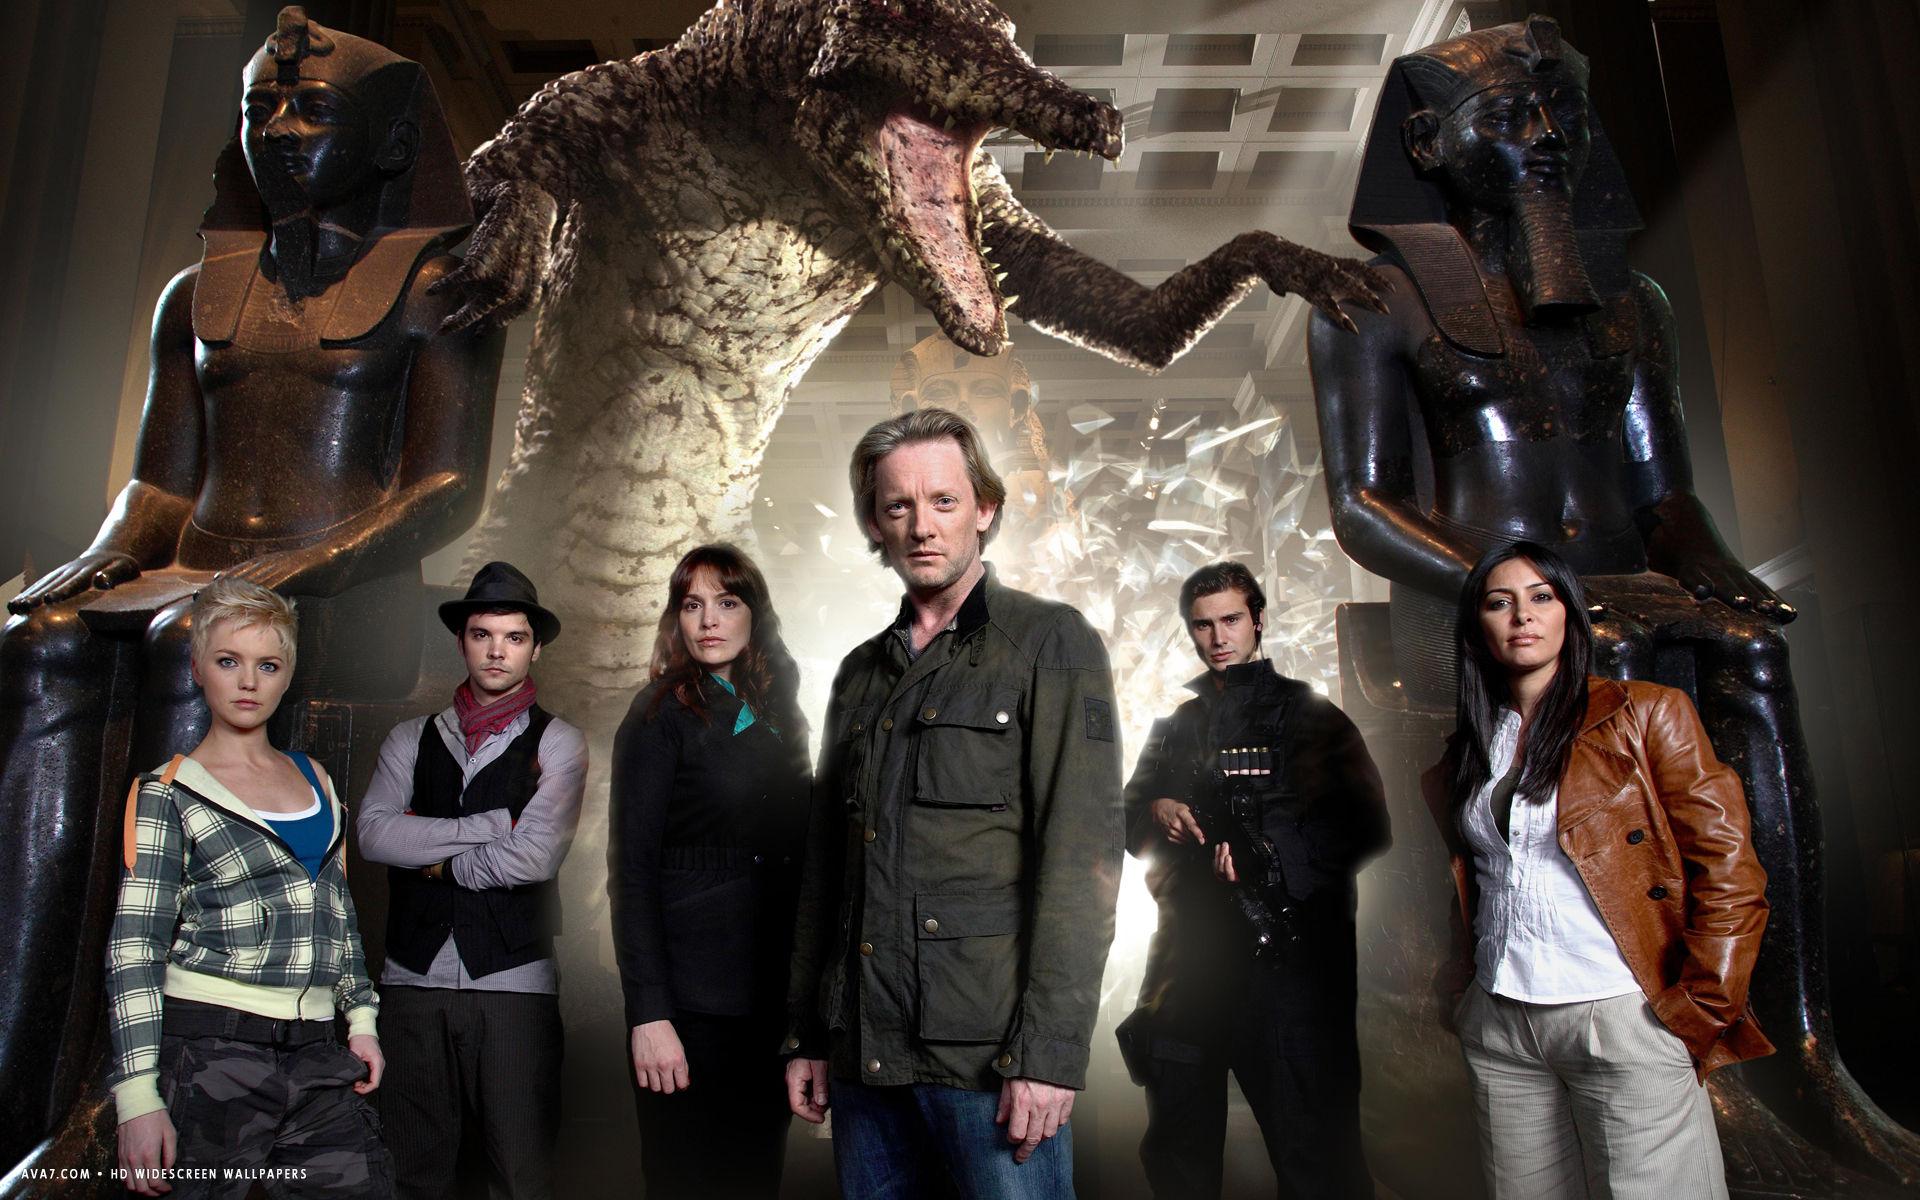 Primeval Wallpaper and Background Image